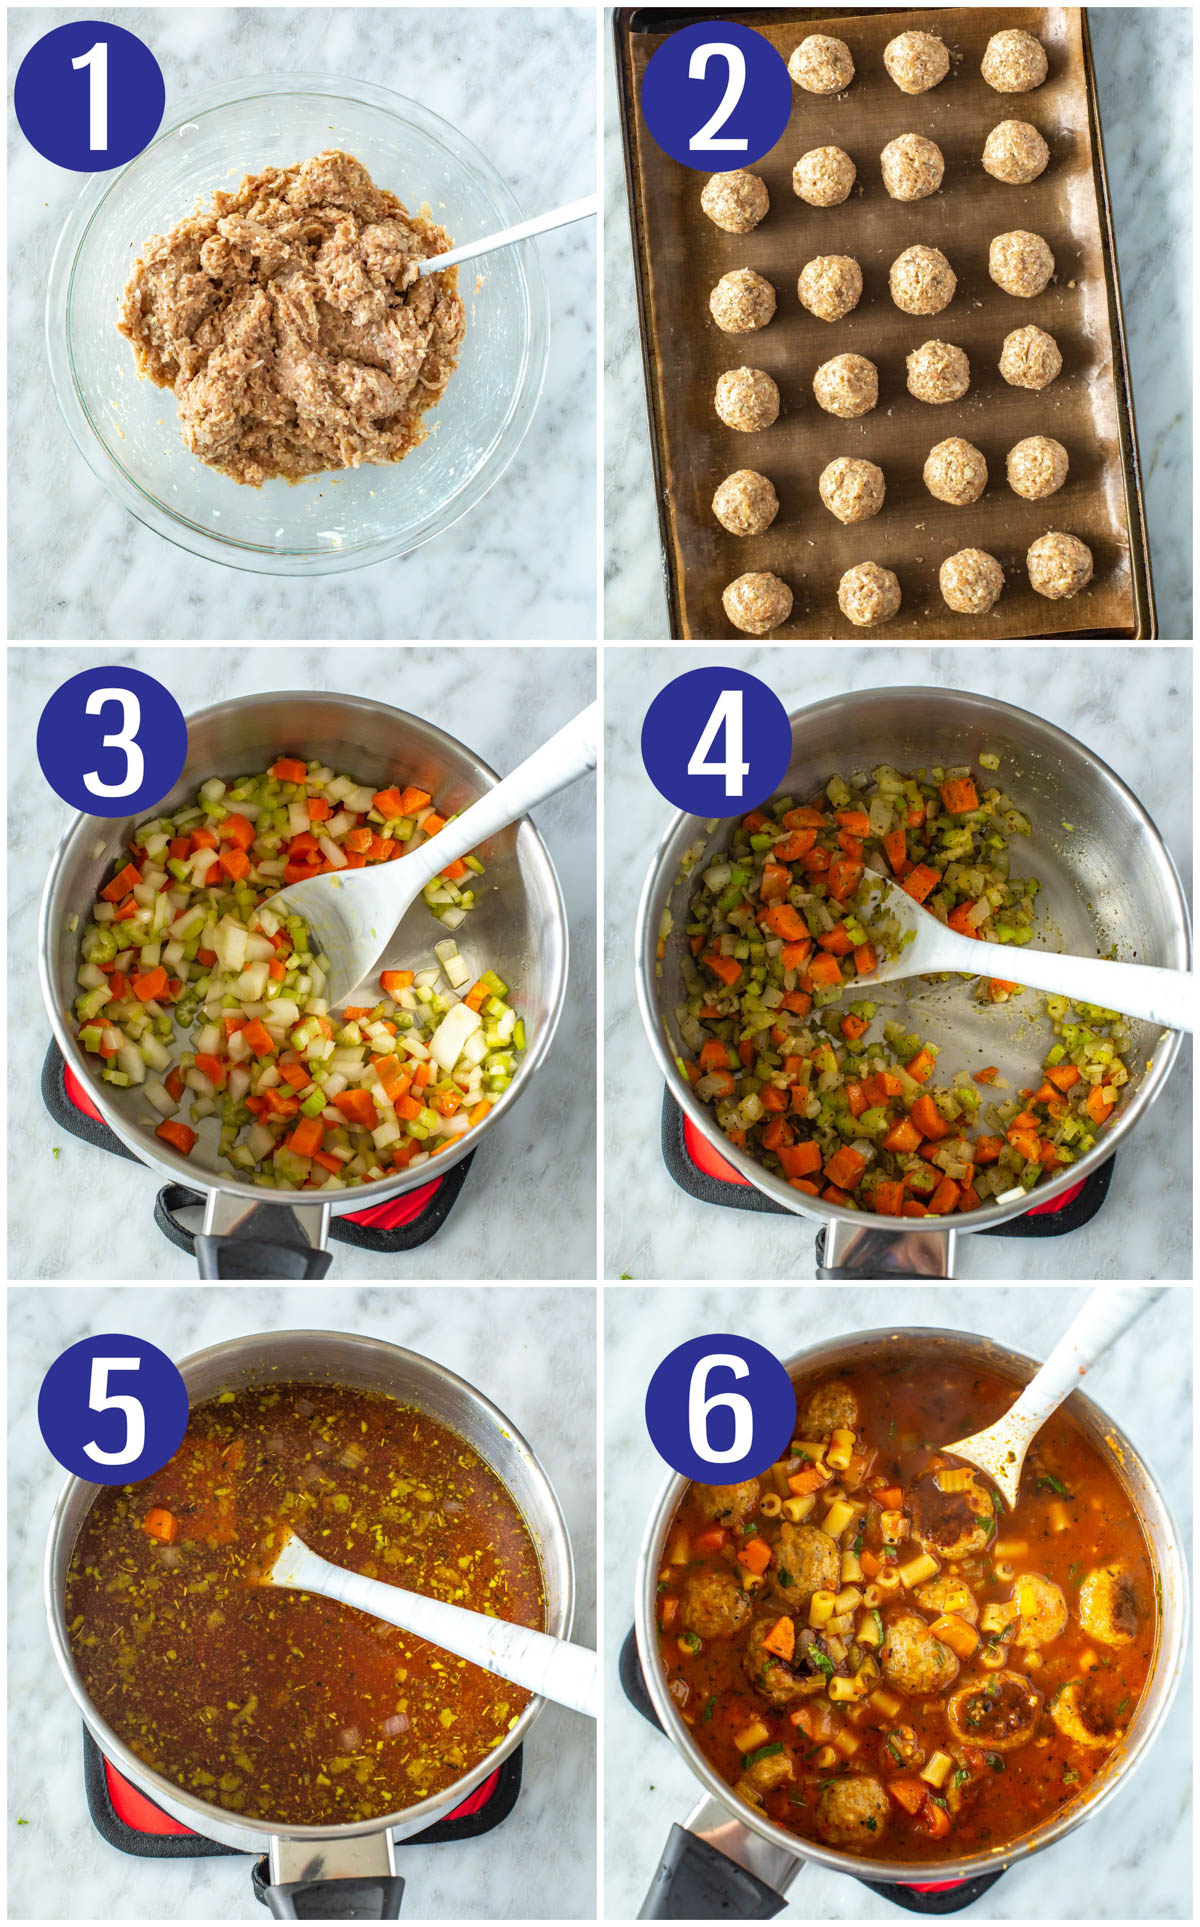 Step-by-step instructions collage for Italian turkey meatball soup: Mix meatball mixture, roll/cook meatballs, cook vegetables, add garlic and seasoning, add diced tomatoes, chicken broth, parmesan rind and pasta, add in cooked meatballs.